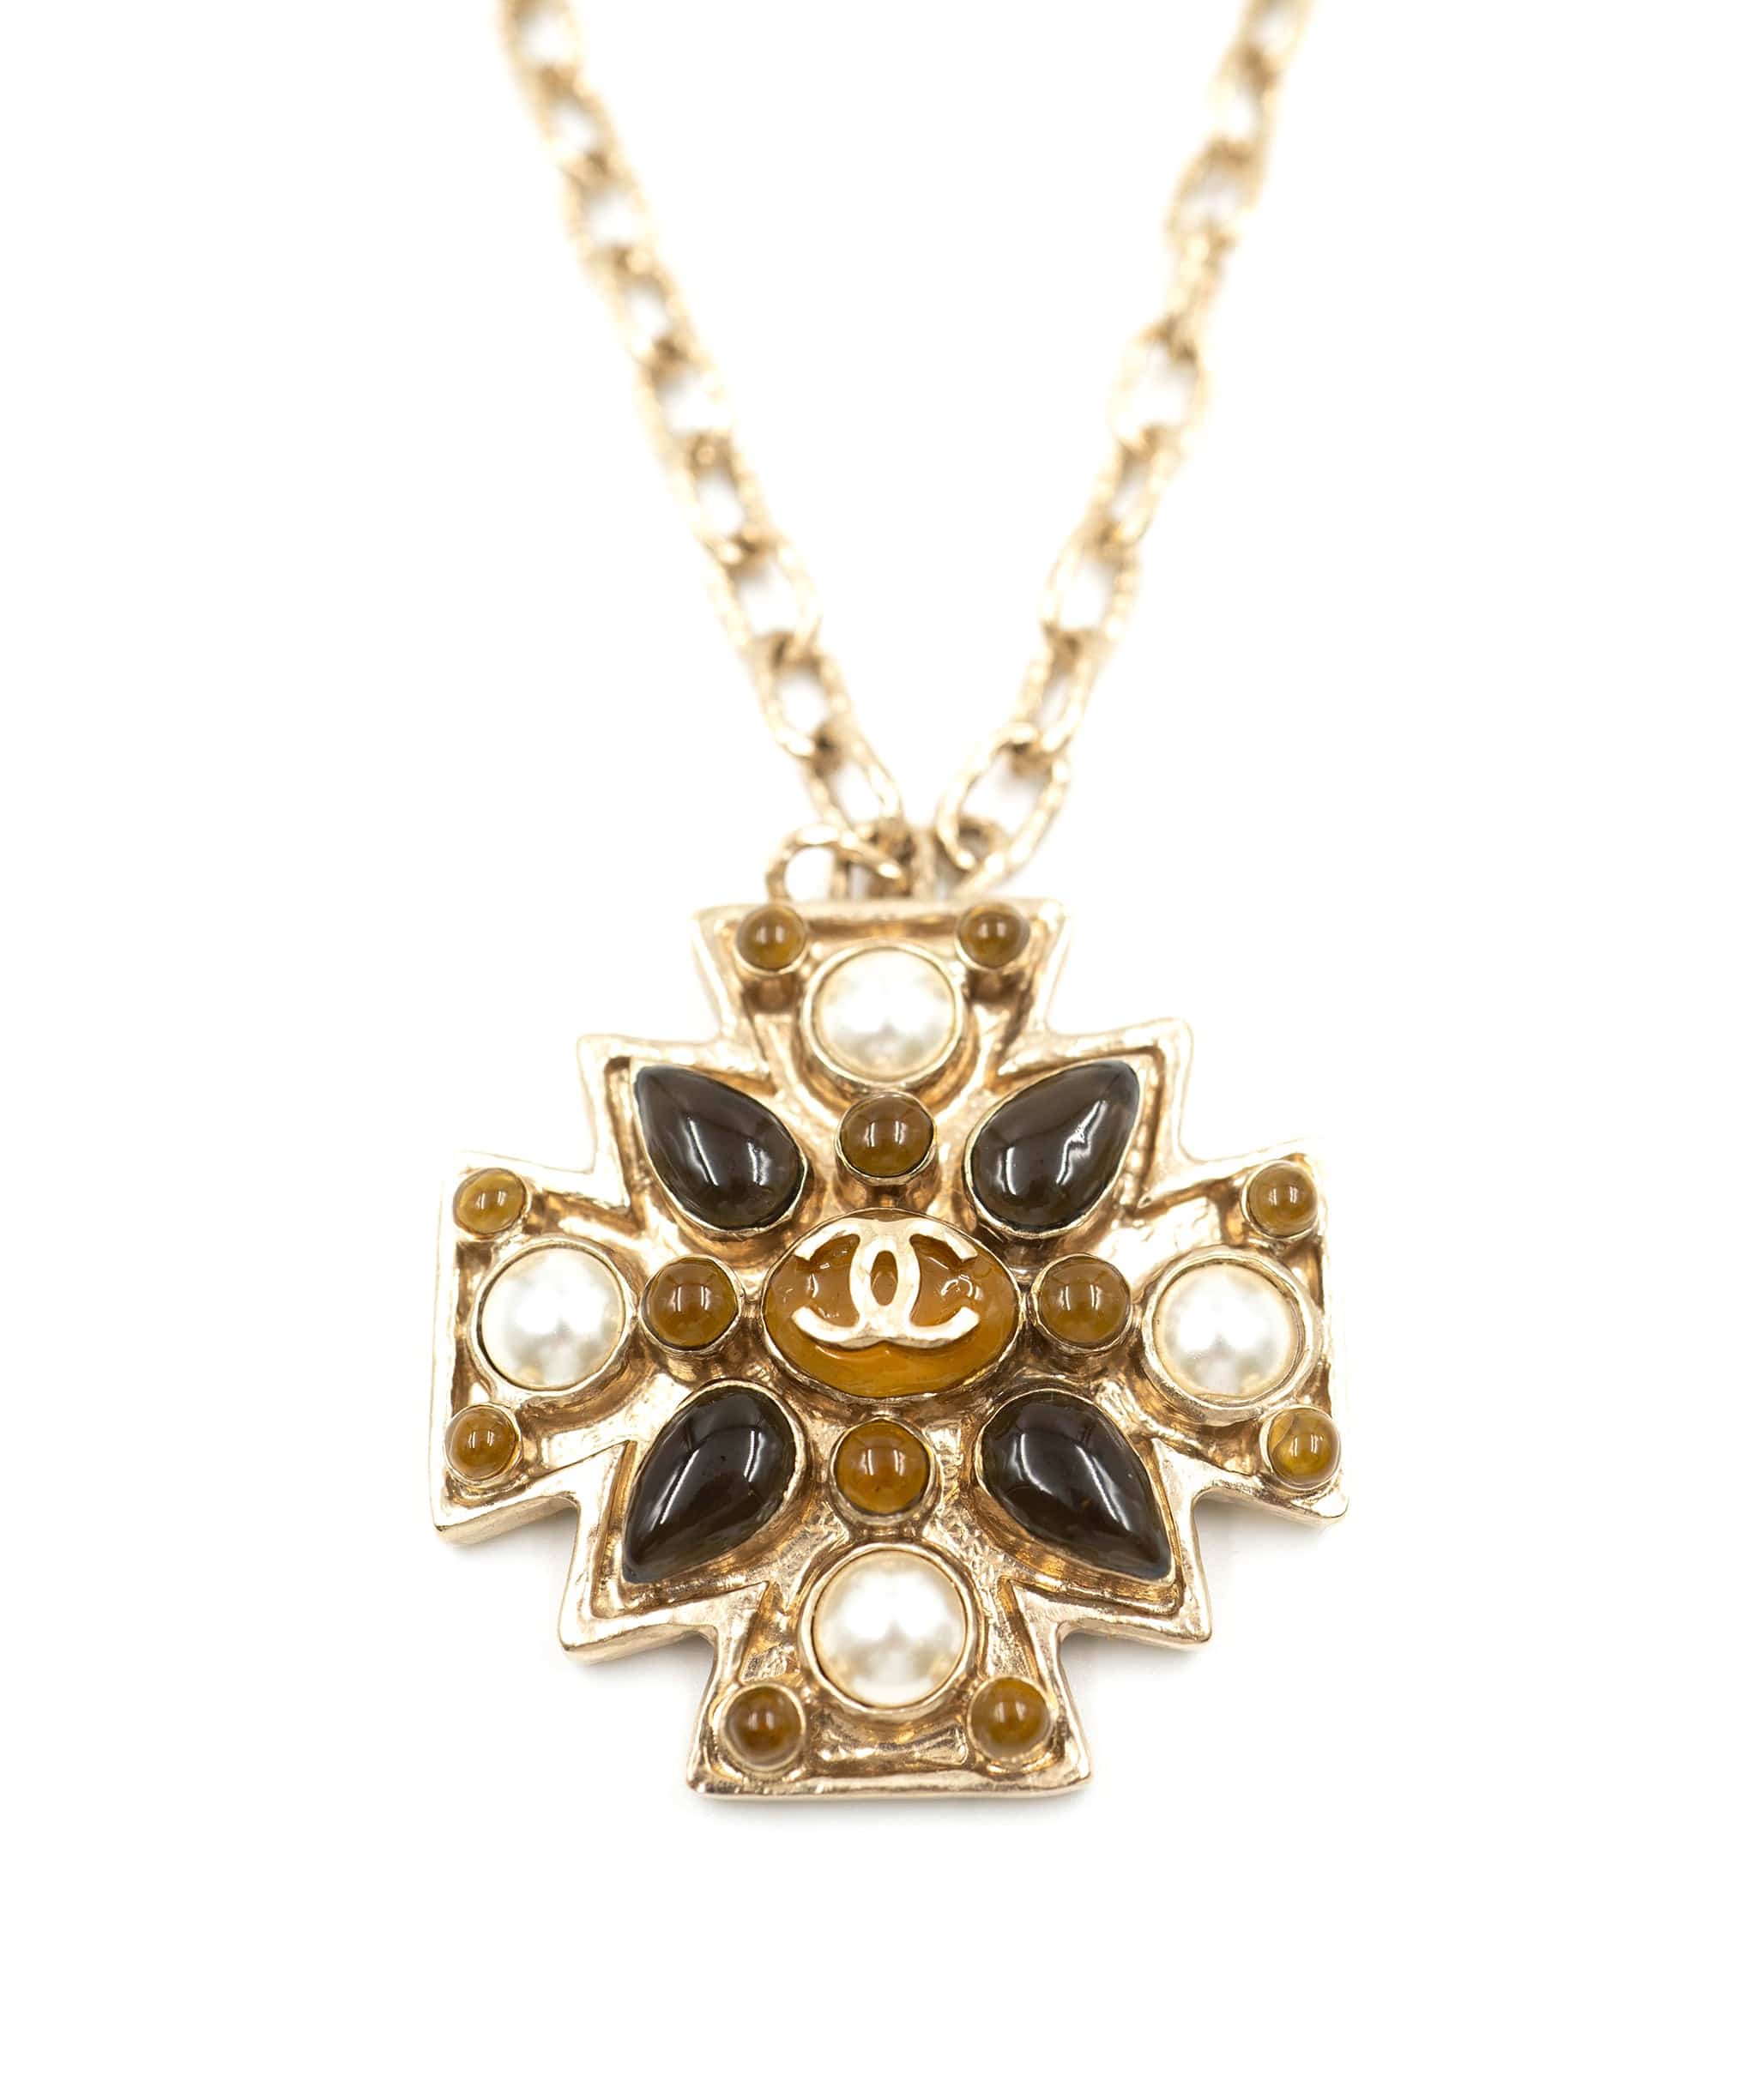 Chanel Gripoix cross from 2013 ASL3968